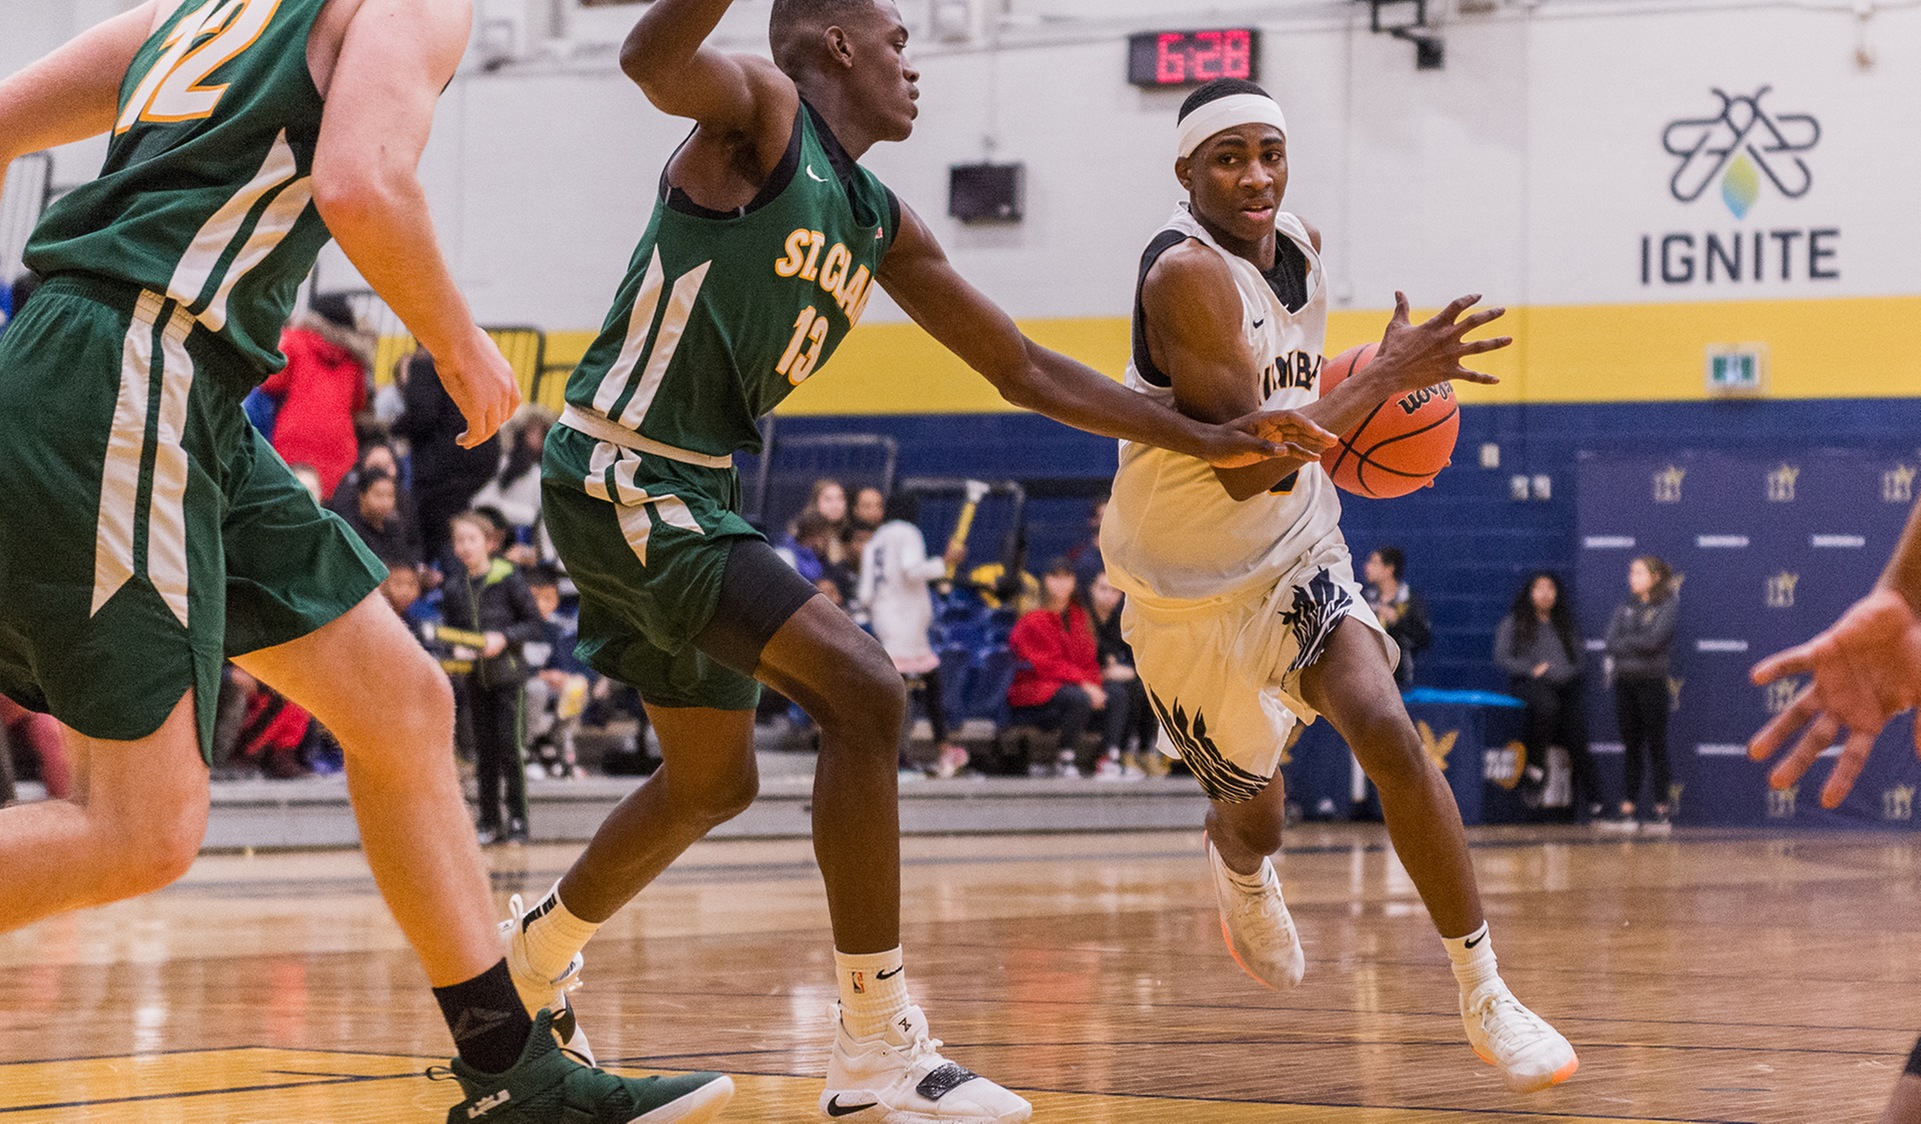 BALANCED ATTACK LEADS No. 3 MEN'S BASKETBALL PAST ST. CLAIR, 100-71